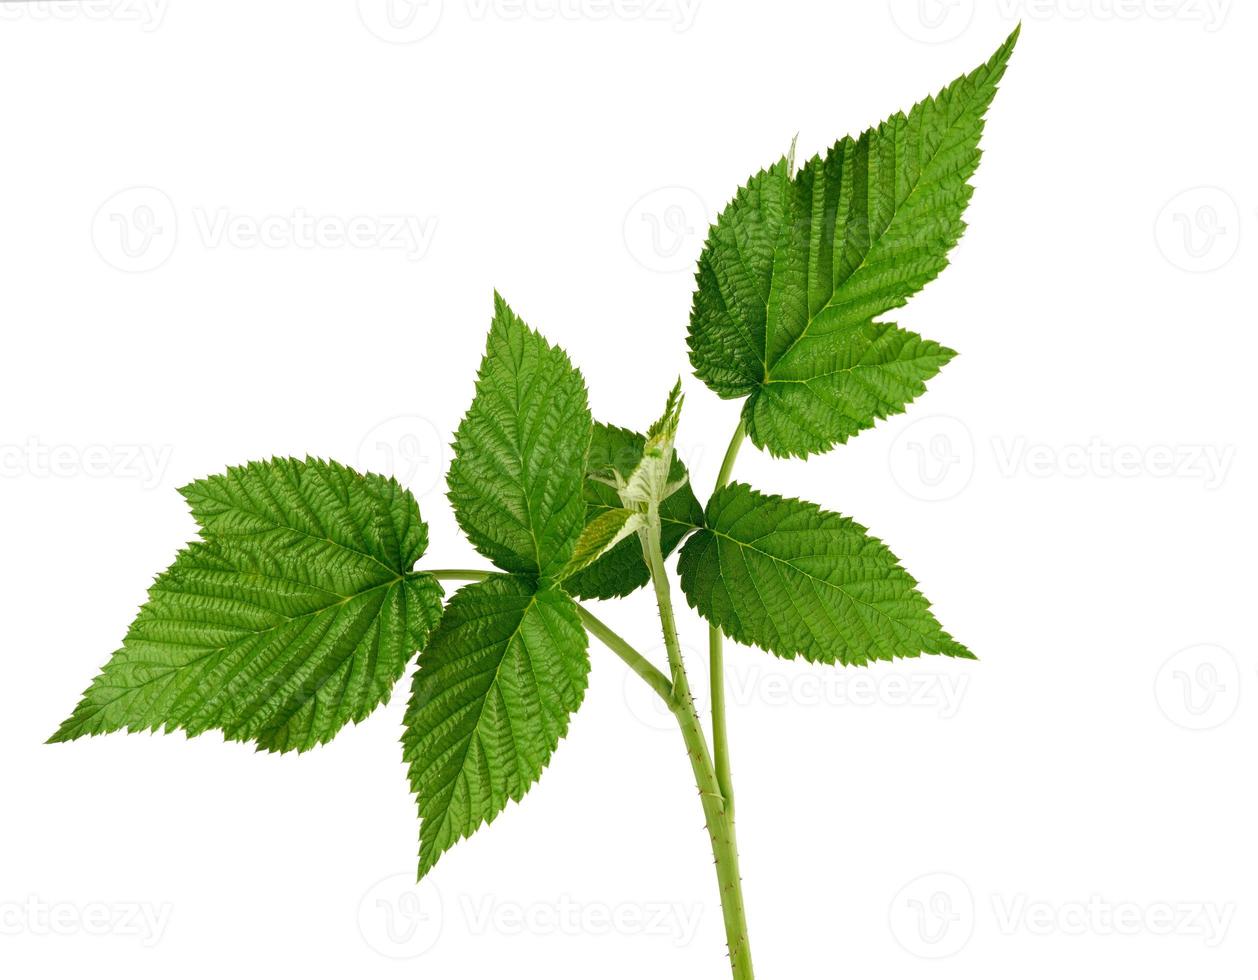 raspberry branch with a green stem and leaves on a white background photo